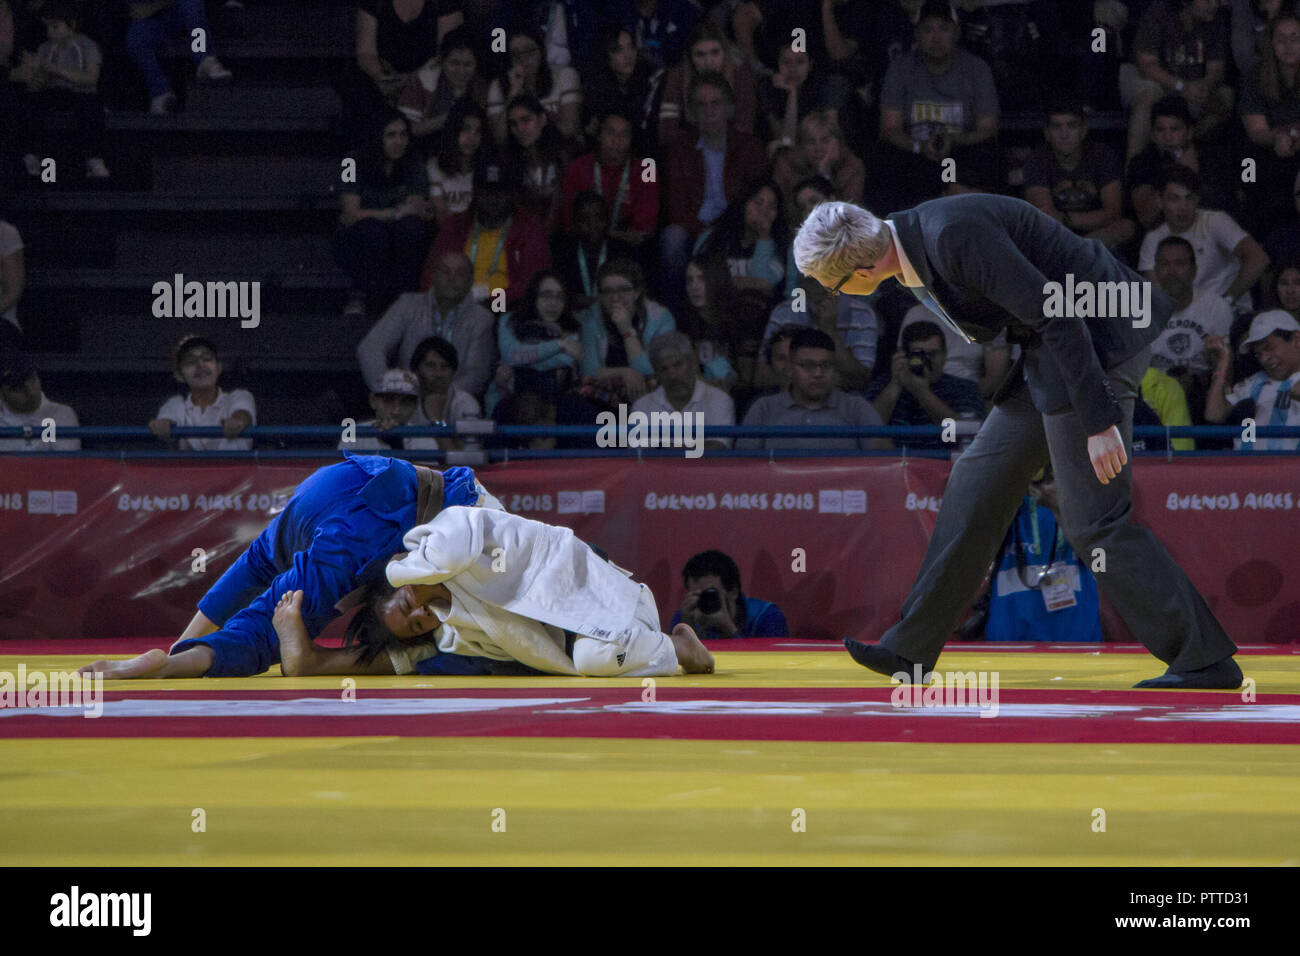 Buenos Aires, Buenos Aires, Argentina. 10th Oct, 2018. Finals of mixed international judo teams. The Croatian Ana Viktorija Puljiz, member of the Beijing gold medal team, faces the Athens team member, winner of the silver medal, the Indian athlete Thangjam Tabadi Devi. Credit: Roberto Almeida Aveledo/ZUMA Wire/Alamy Live News Stock Photo